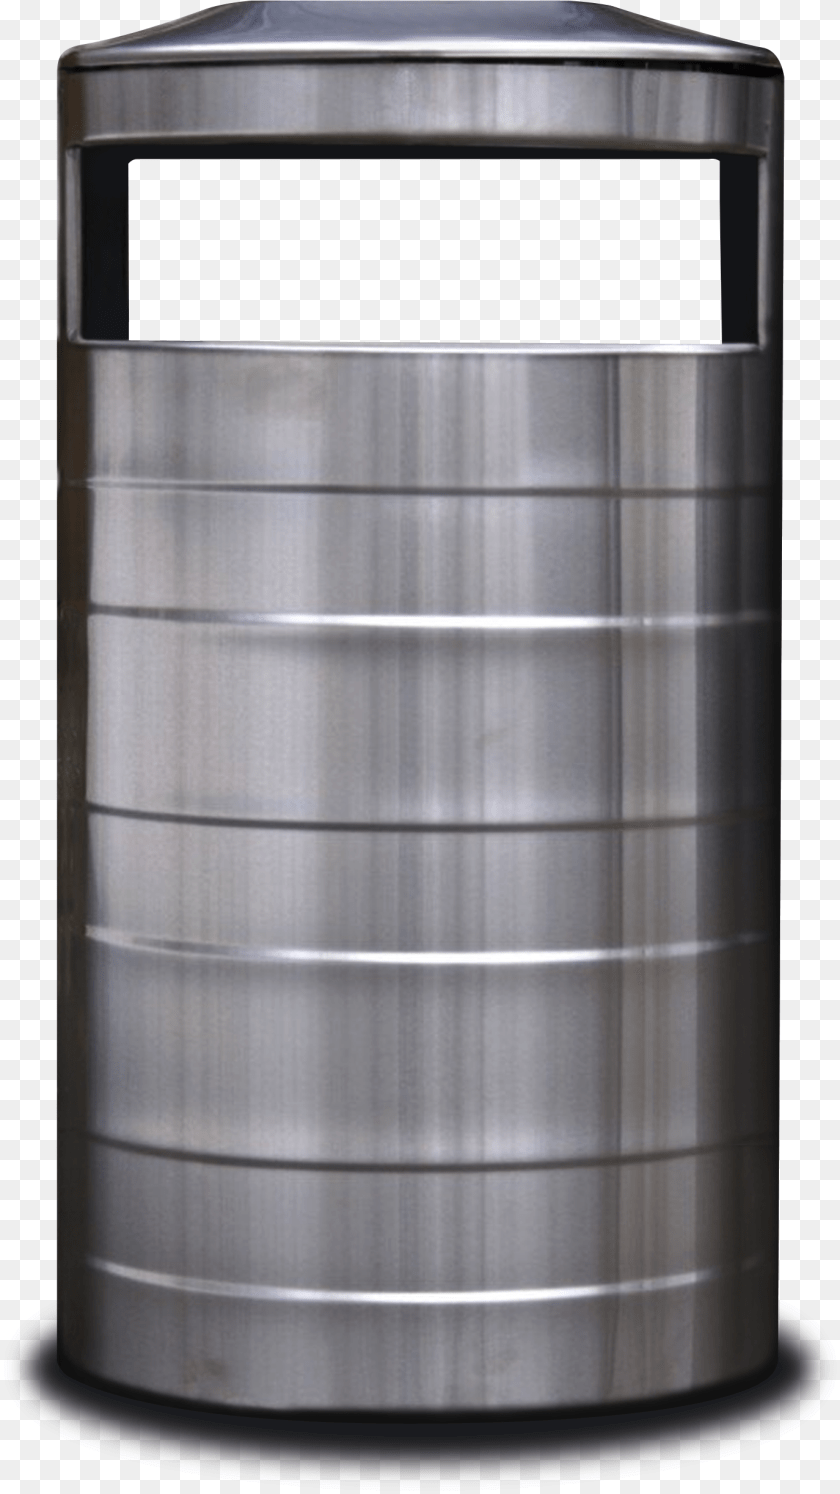 1375x2446 Images Trash Can Trash Rubbish Bin Rubbish Waste Container, Tin, Bottle, Shaker, Trash Can PNG